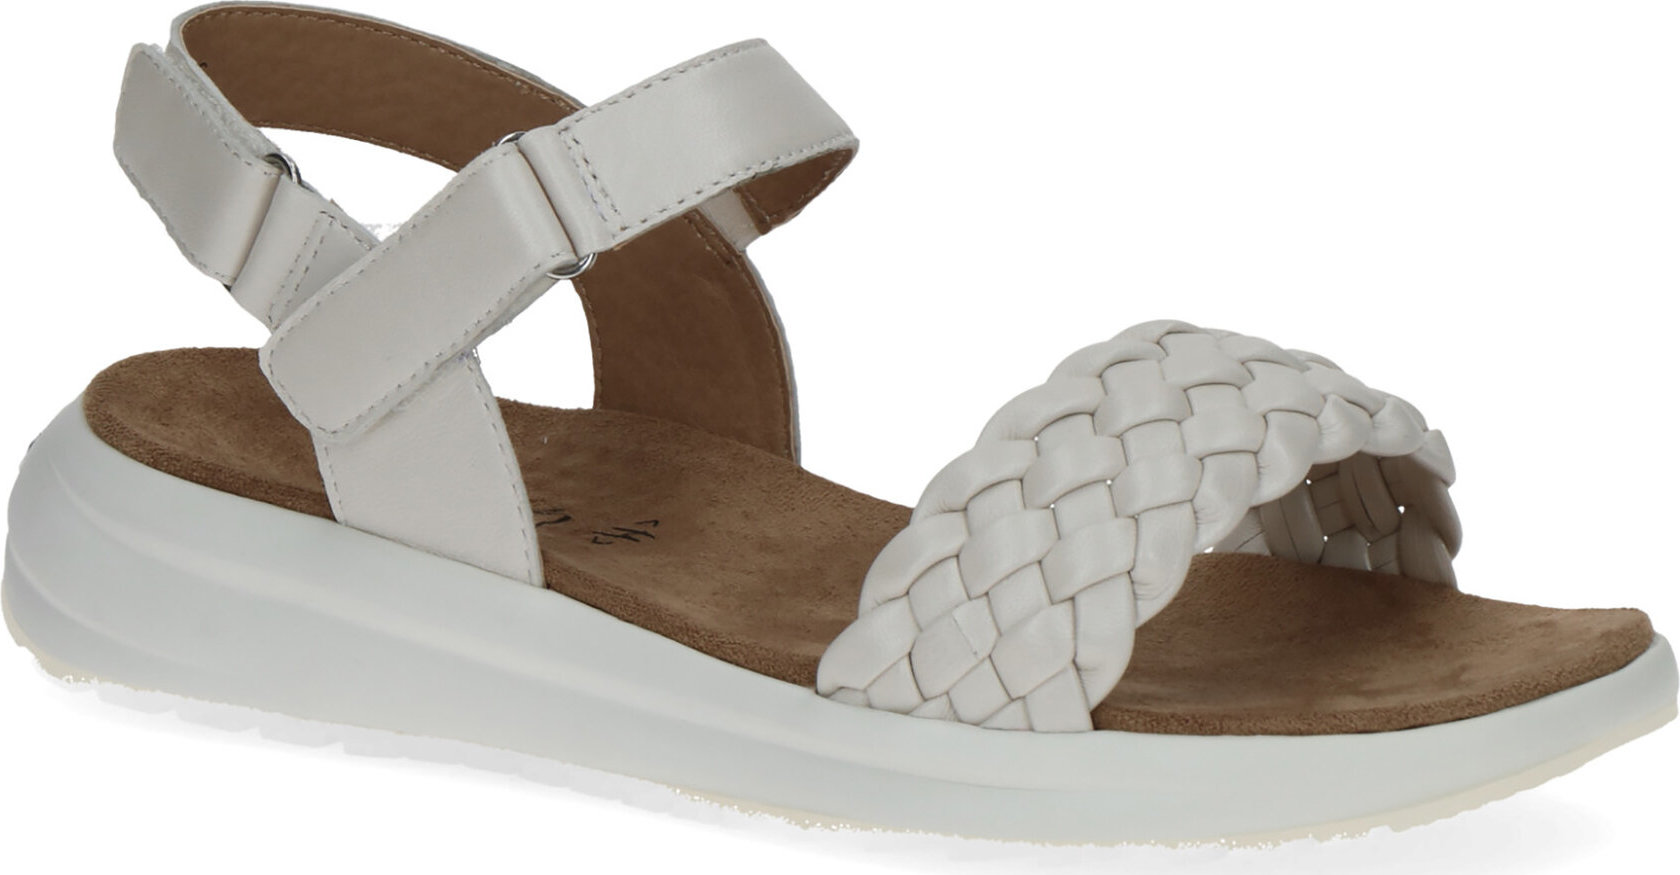 Sandály Caprice 9-28717-20 Offwhite Perl. 143